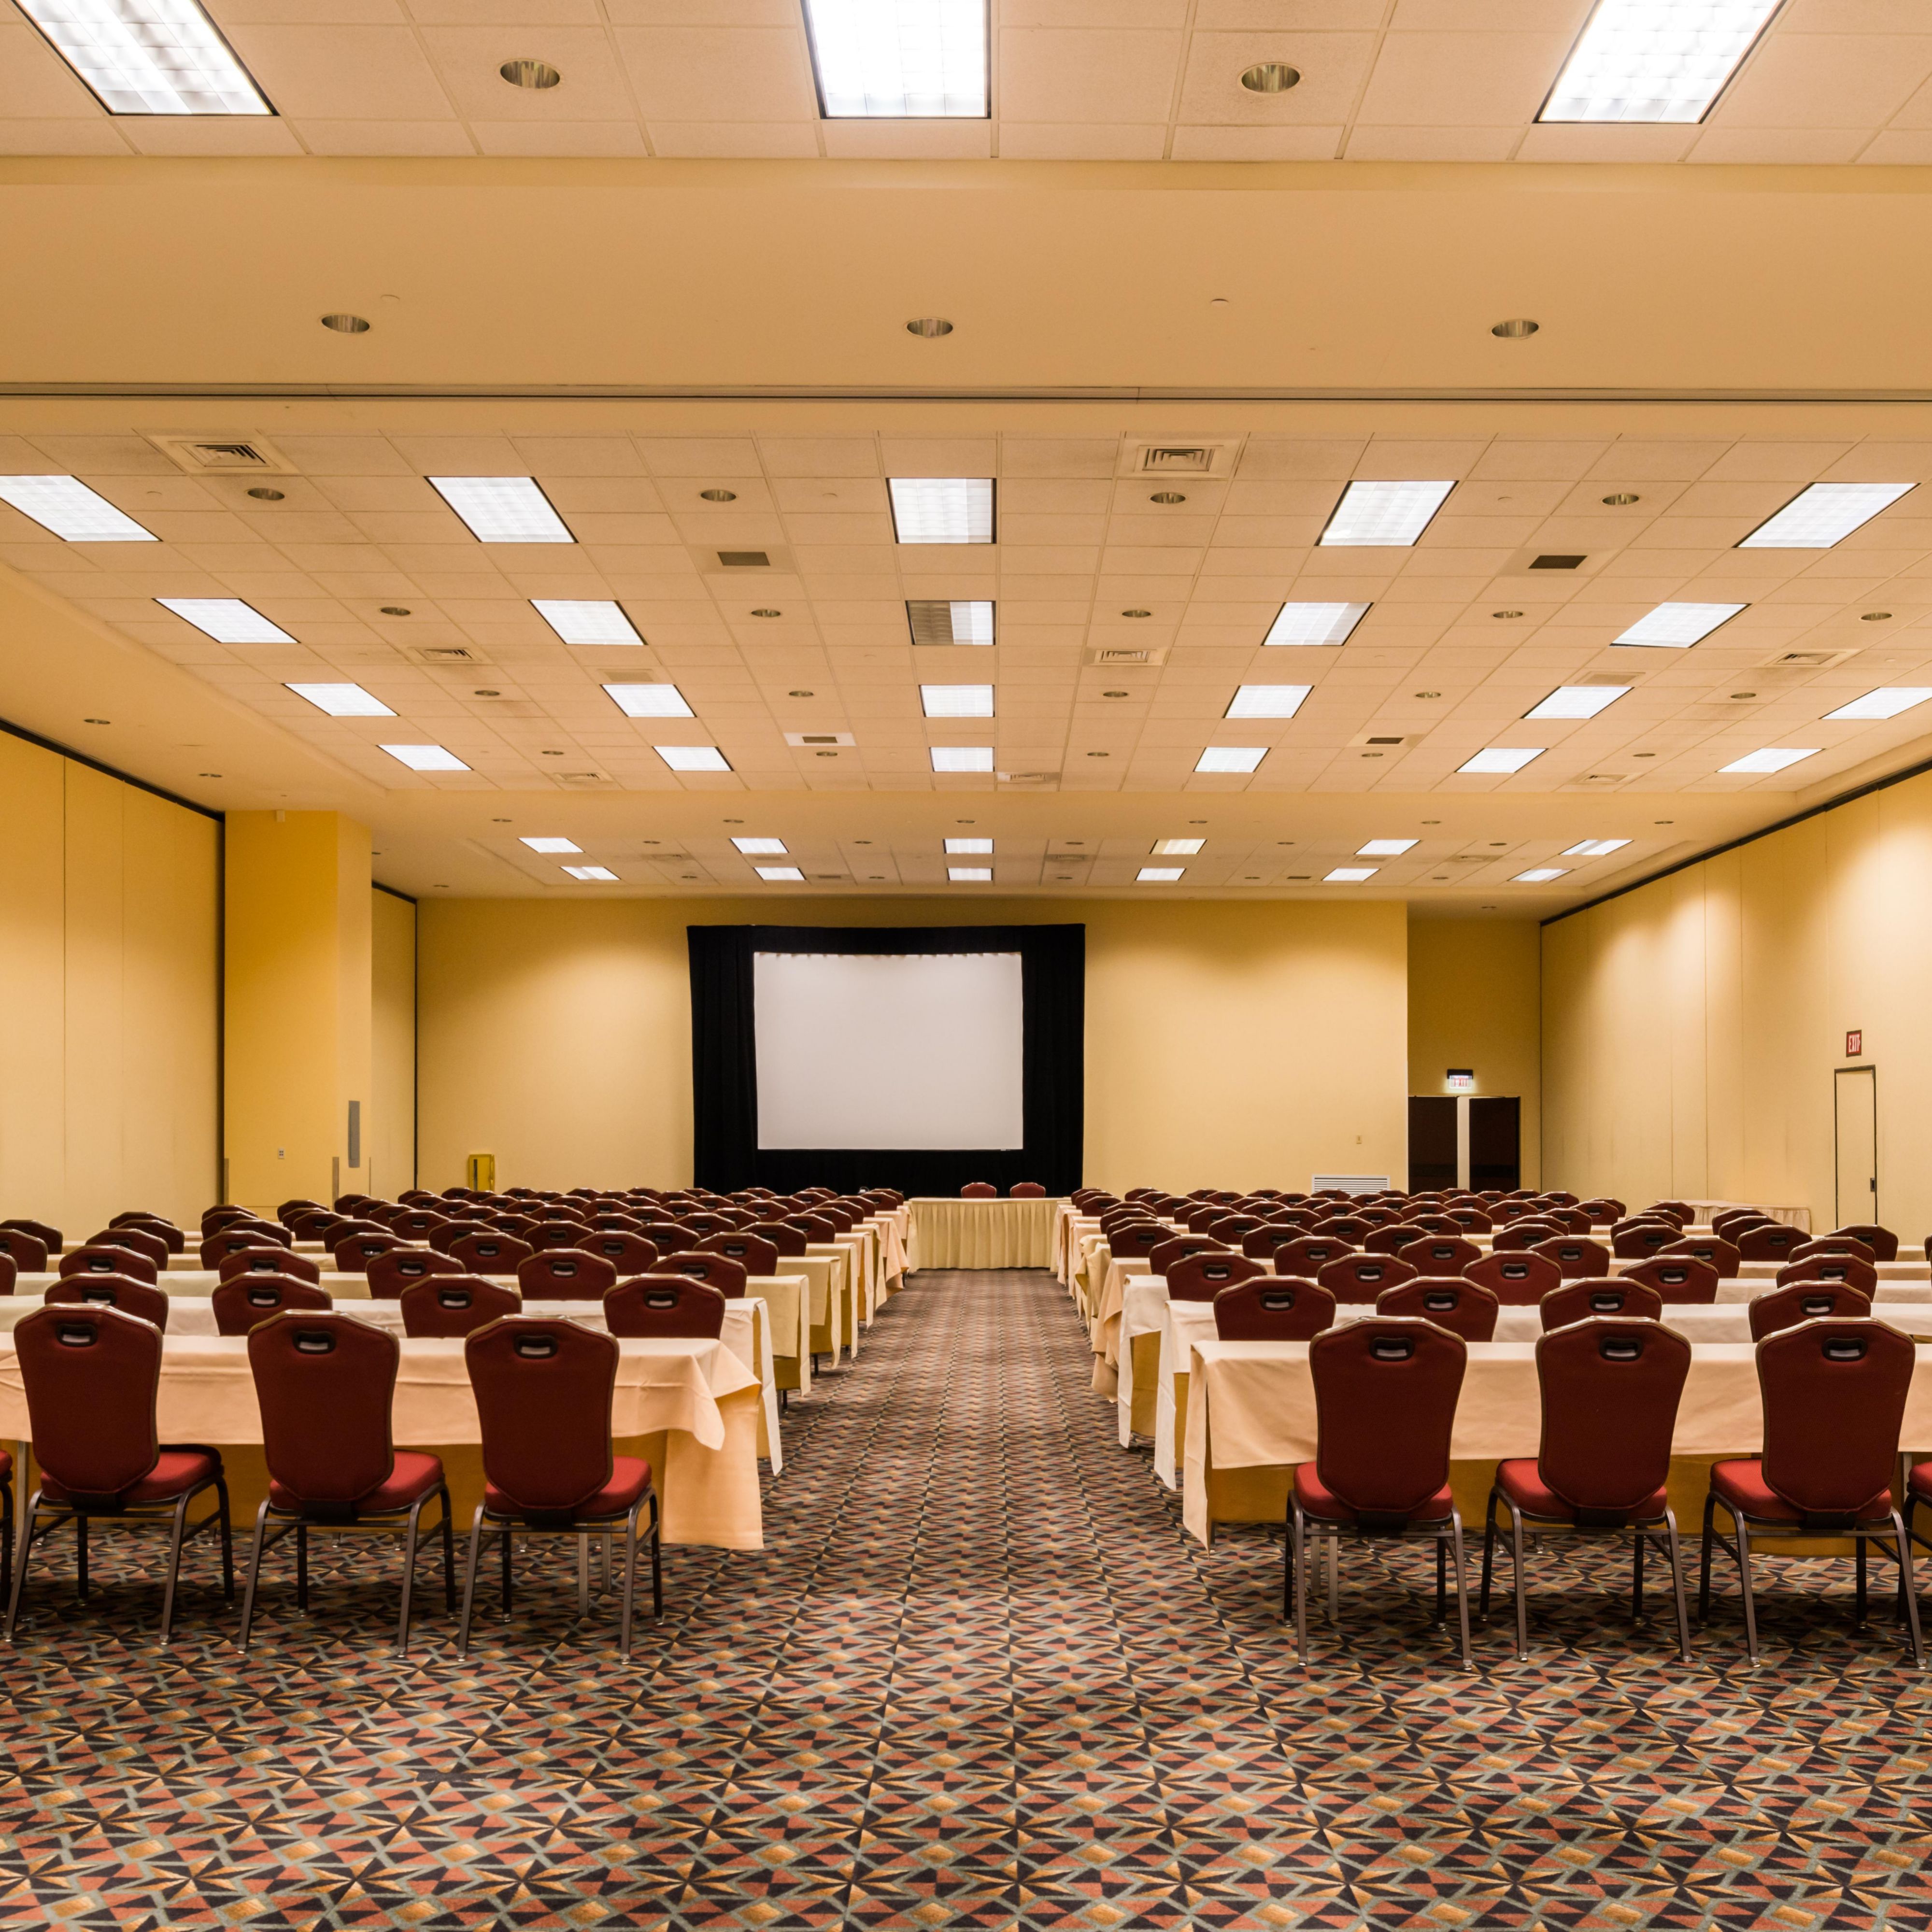 Convention Center set for a meeting in classroom style